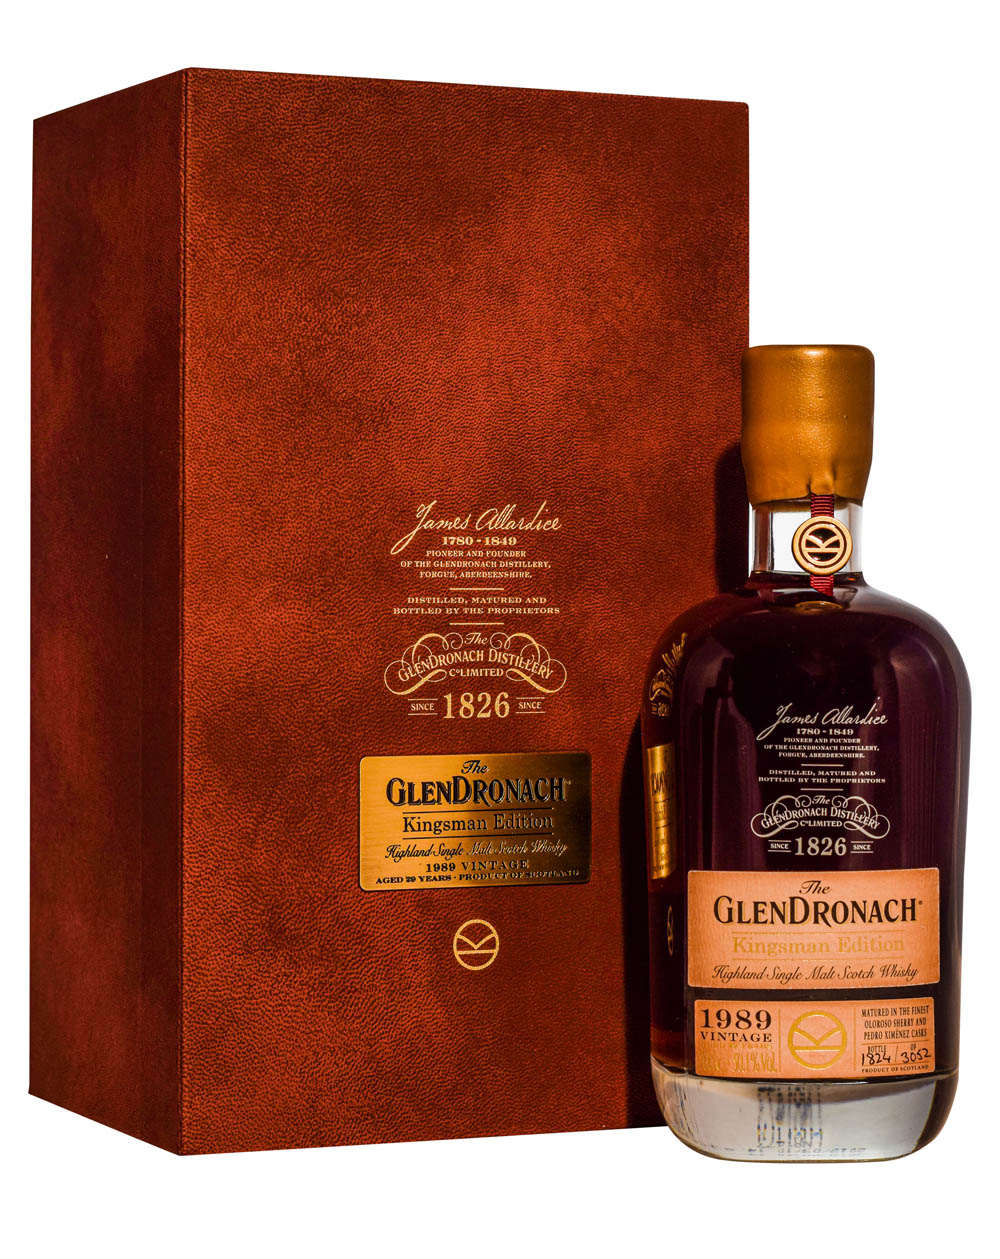 Glendronach 1989 Vintage Kingsman Edition (29 Years Old) Box 1 Musthave Malts MHM